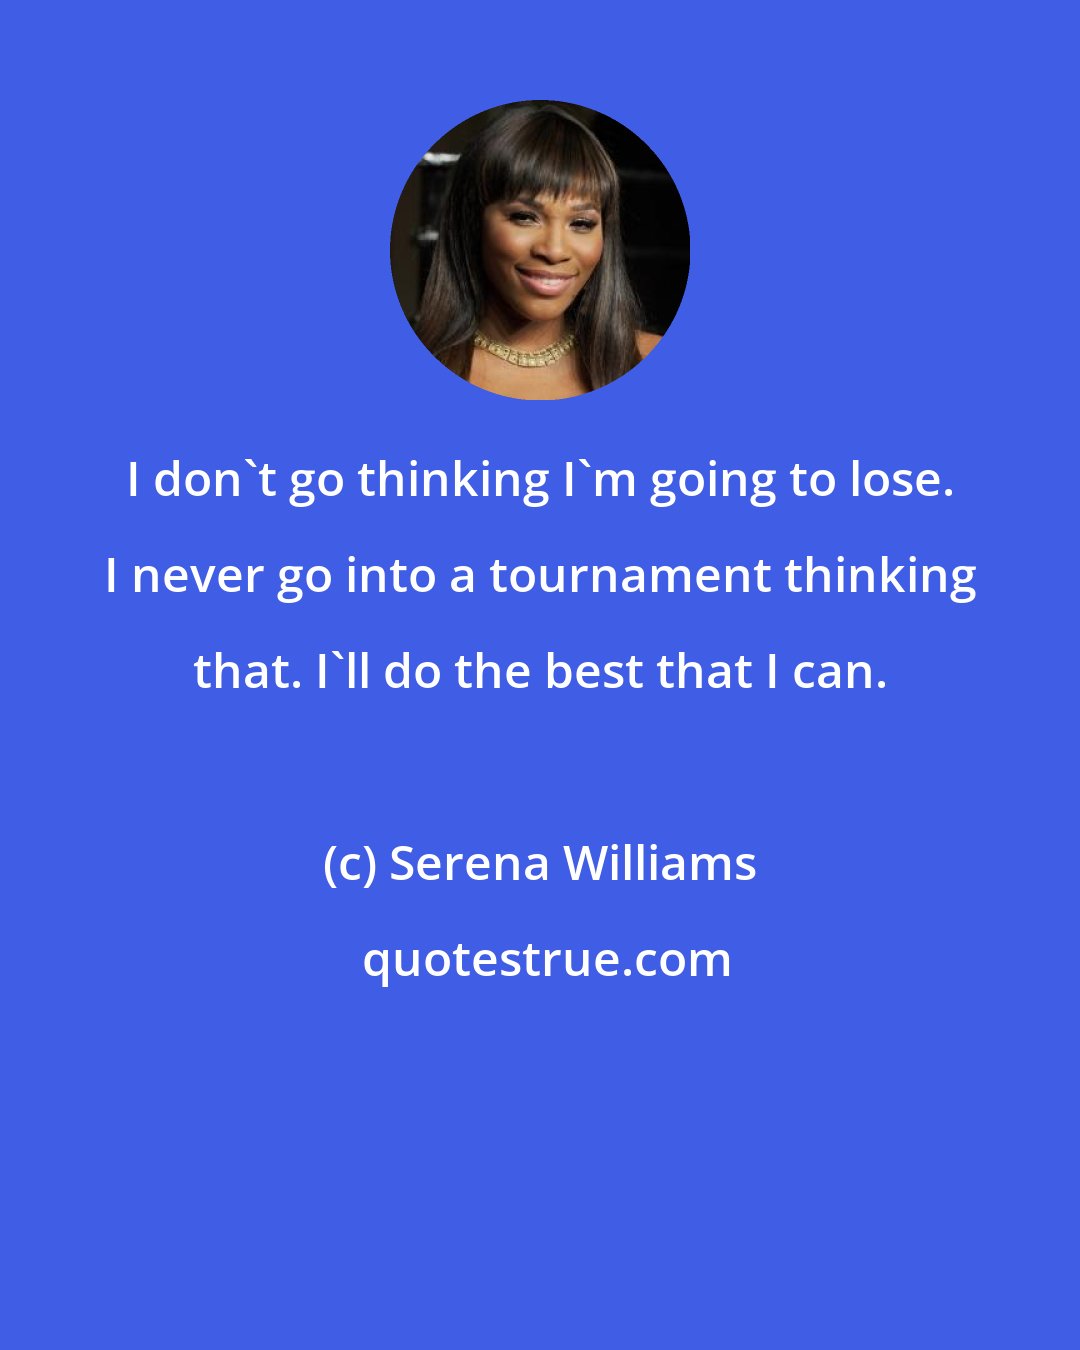 Serena Williams: I don't go thinking I'm going to lose. I never go into a tournament thinking that. I'll do the best that I can.